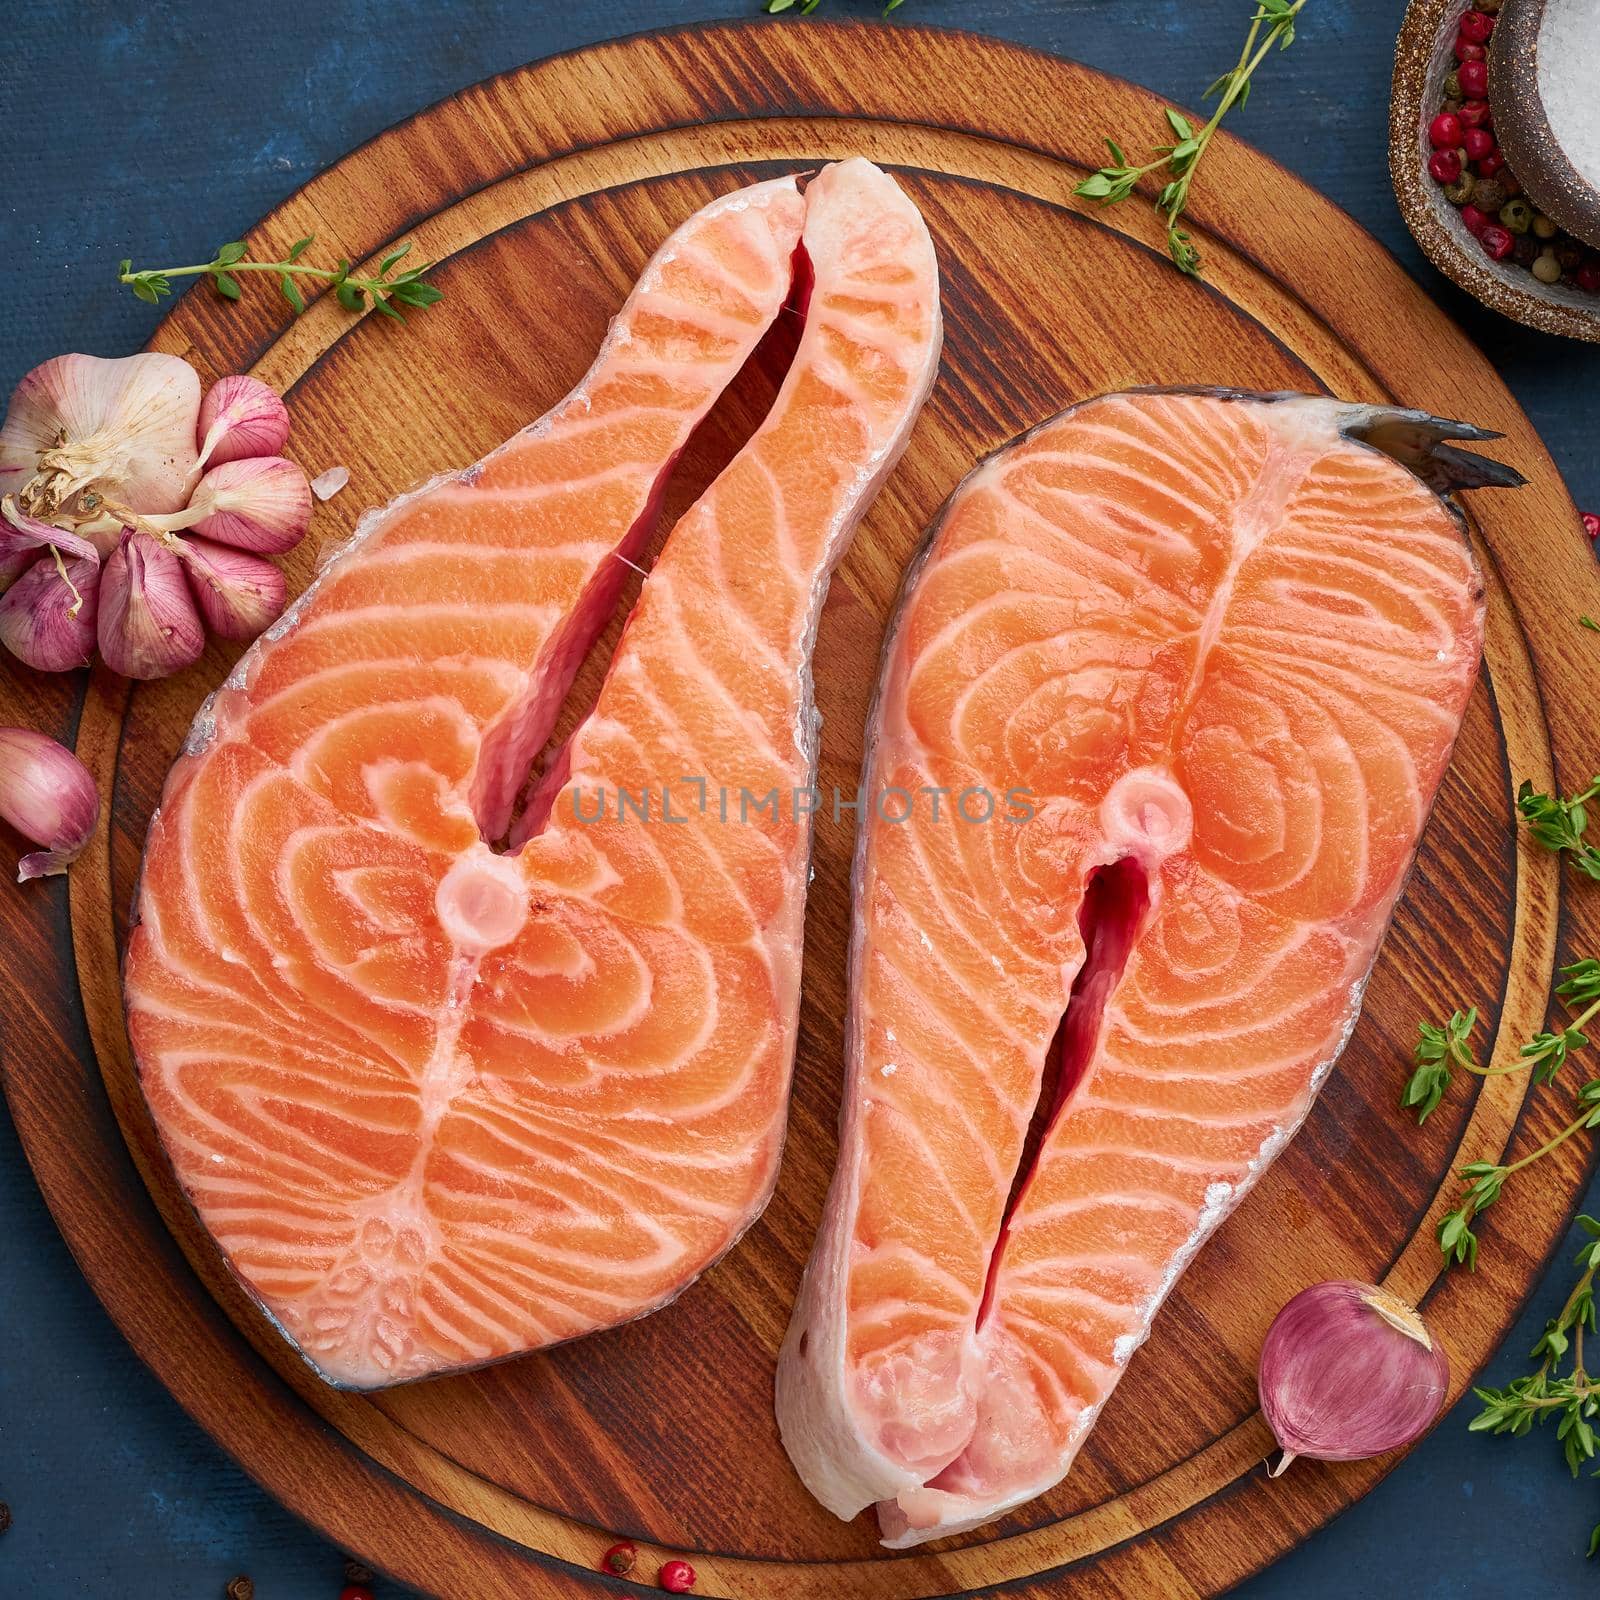 Two salmon steaks, fish fillet, large sliced portions on chopping board on dark table. Top view, close up